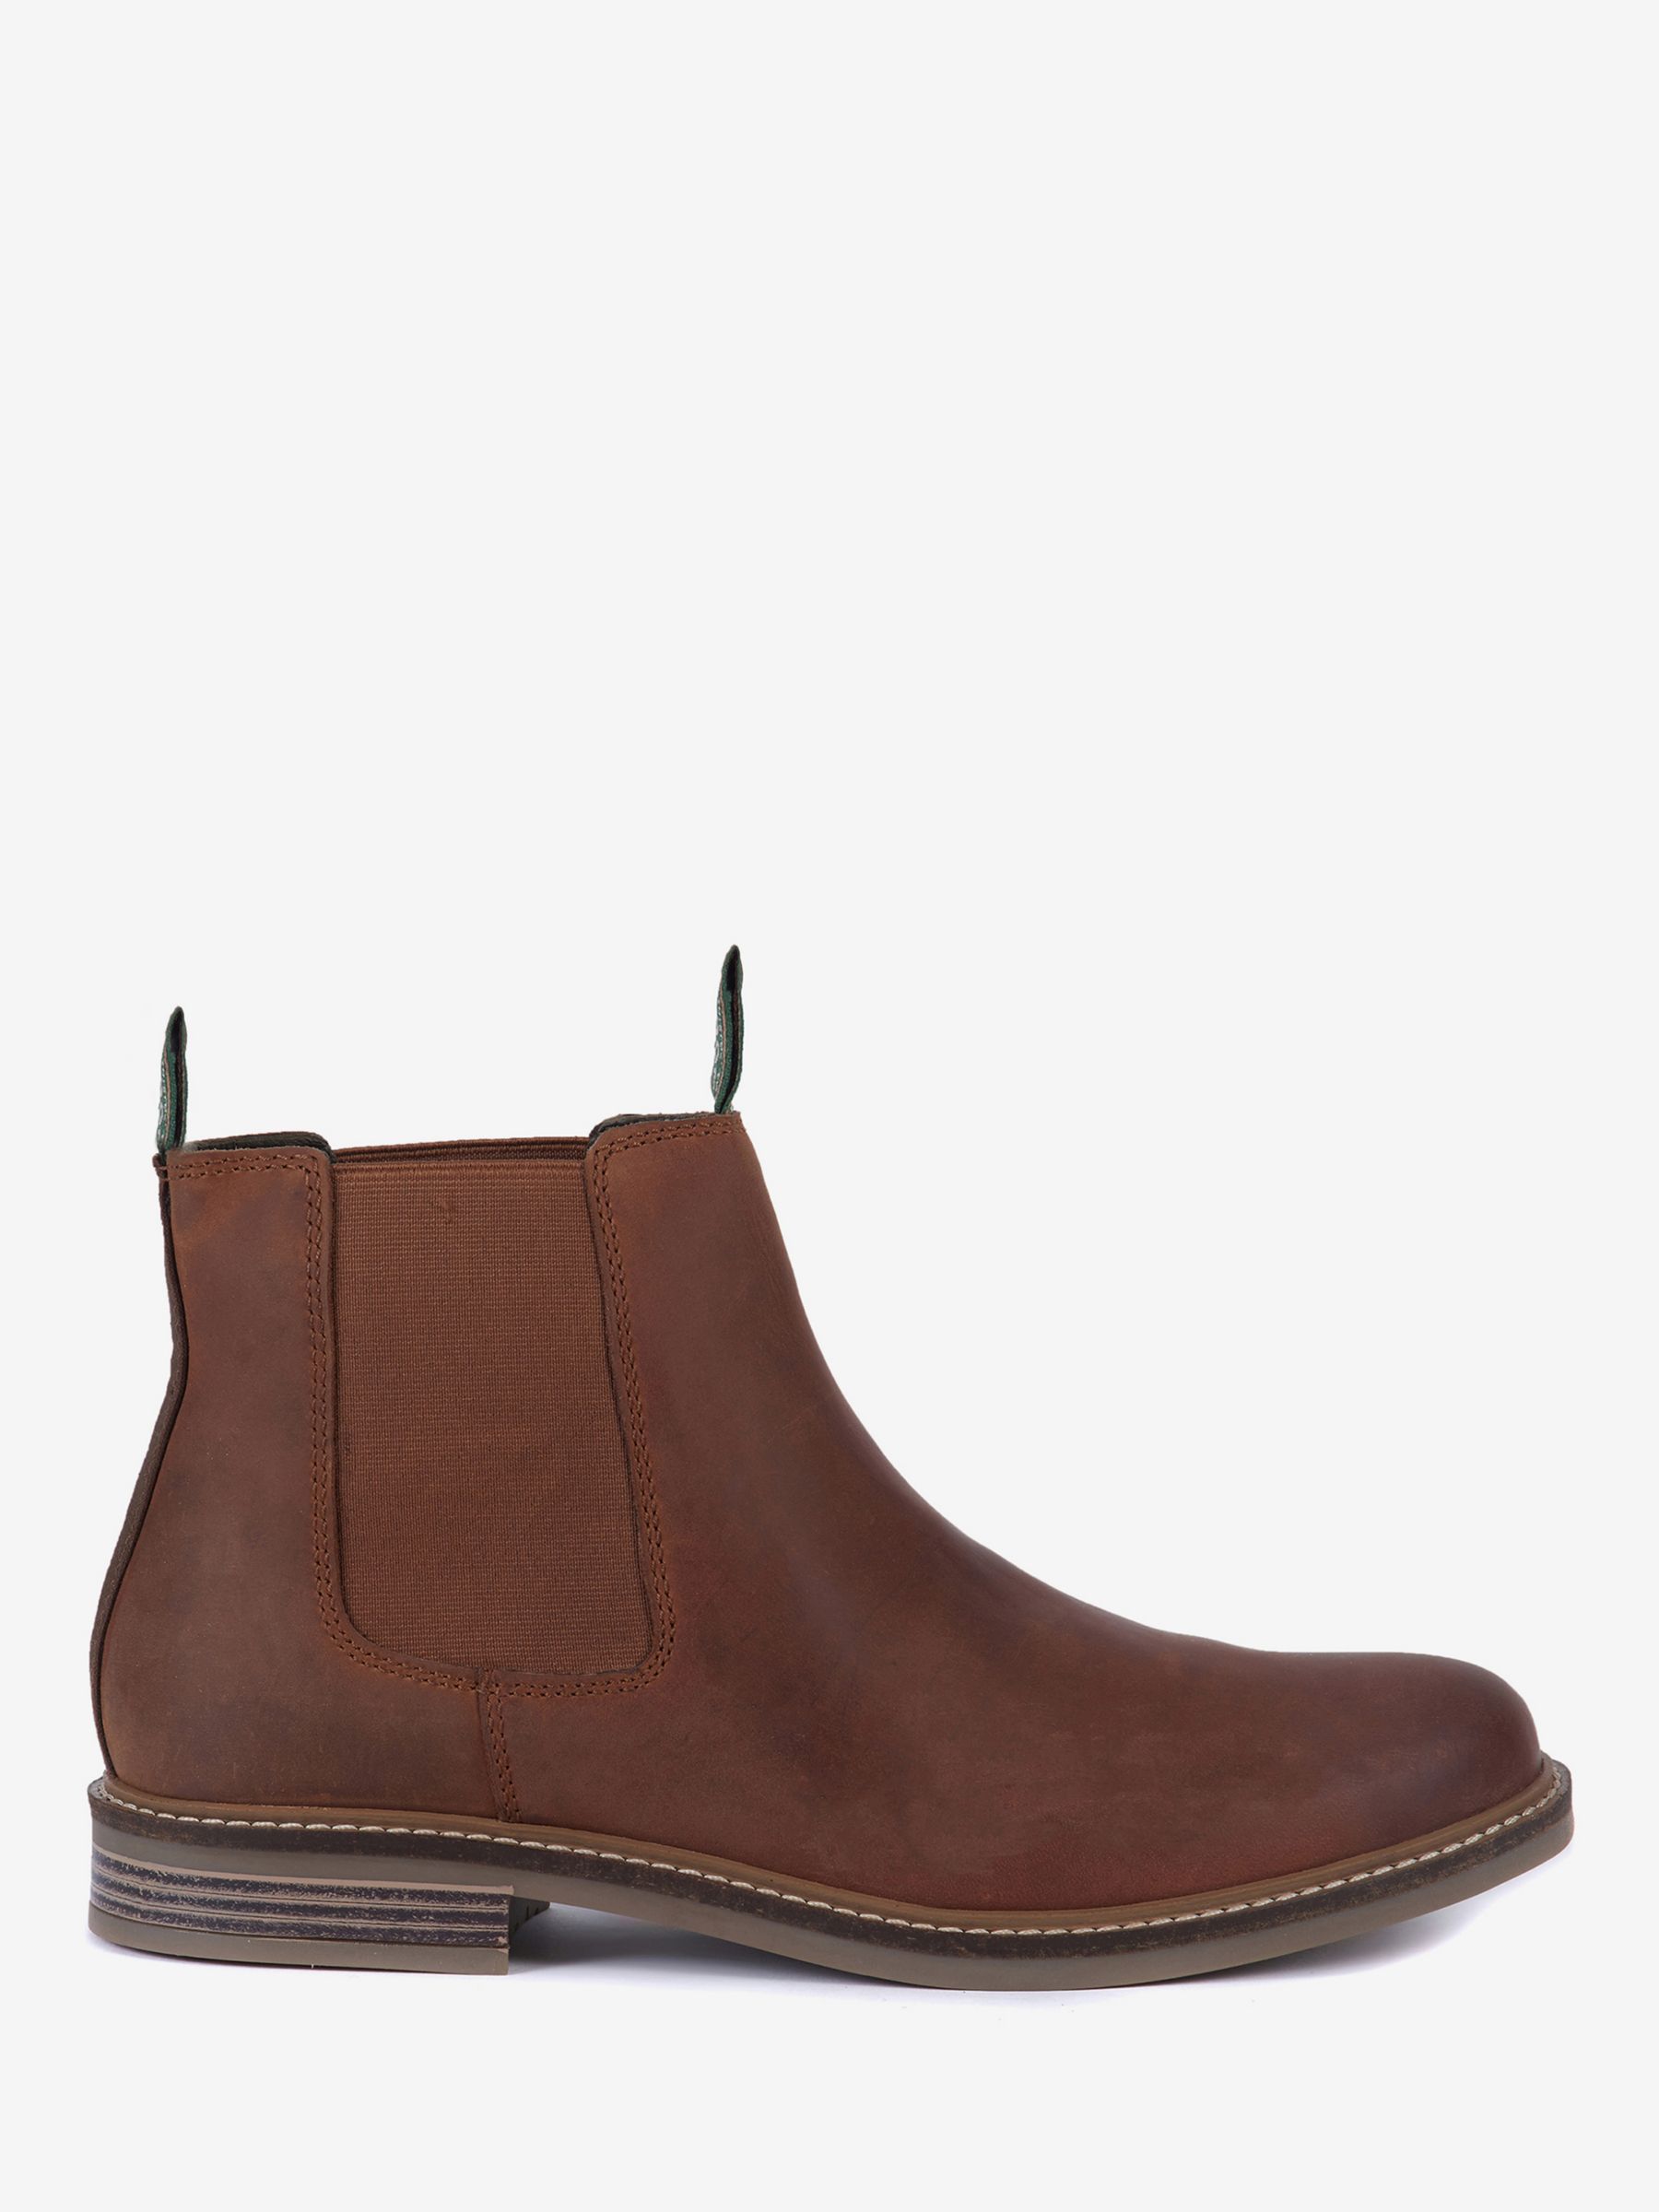 Barbour Farsley Slip On Boots, Brown at 